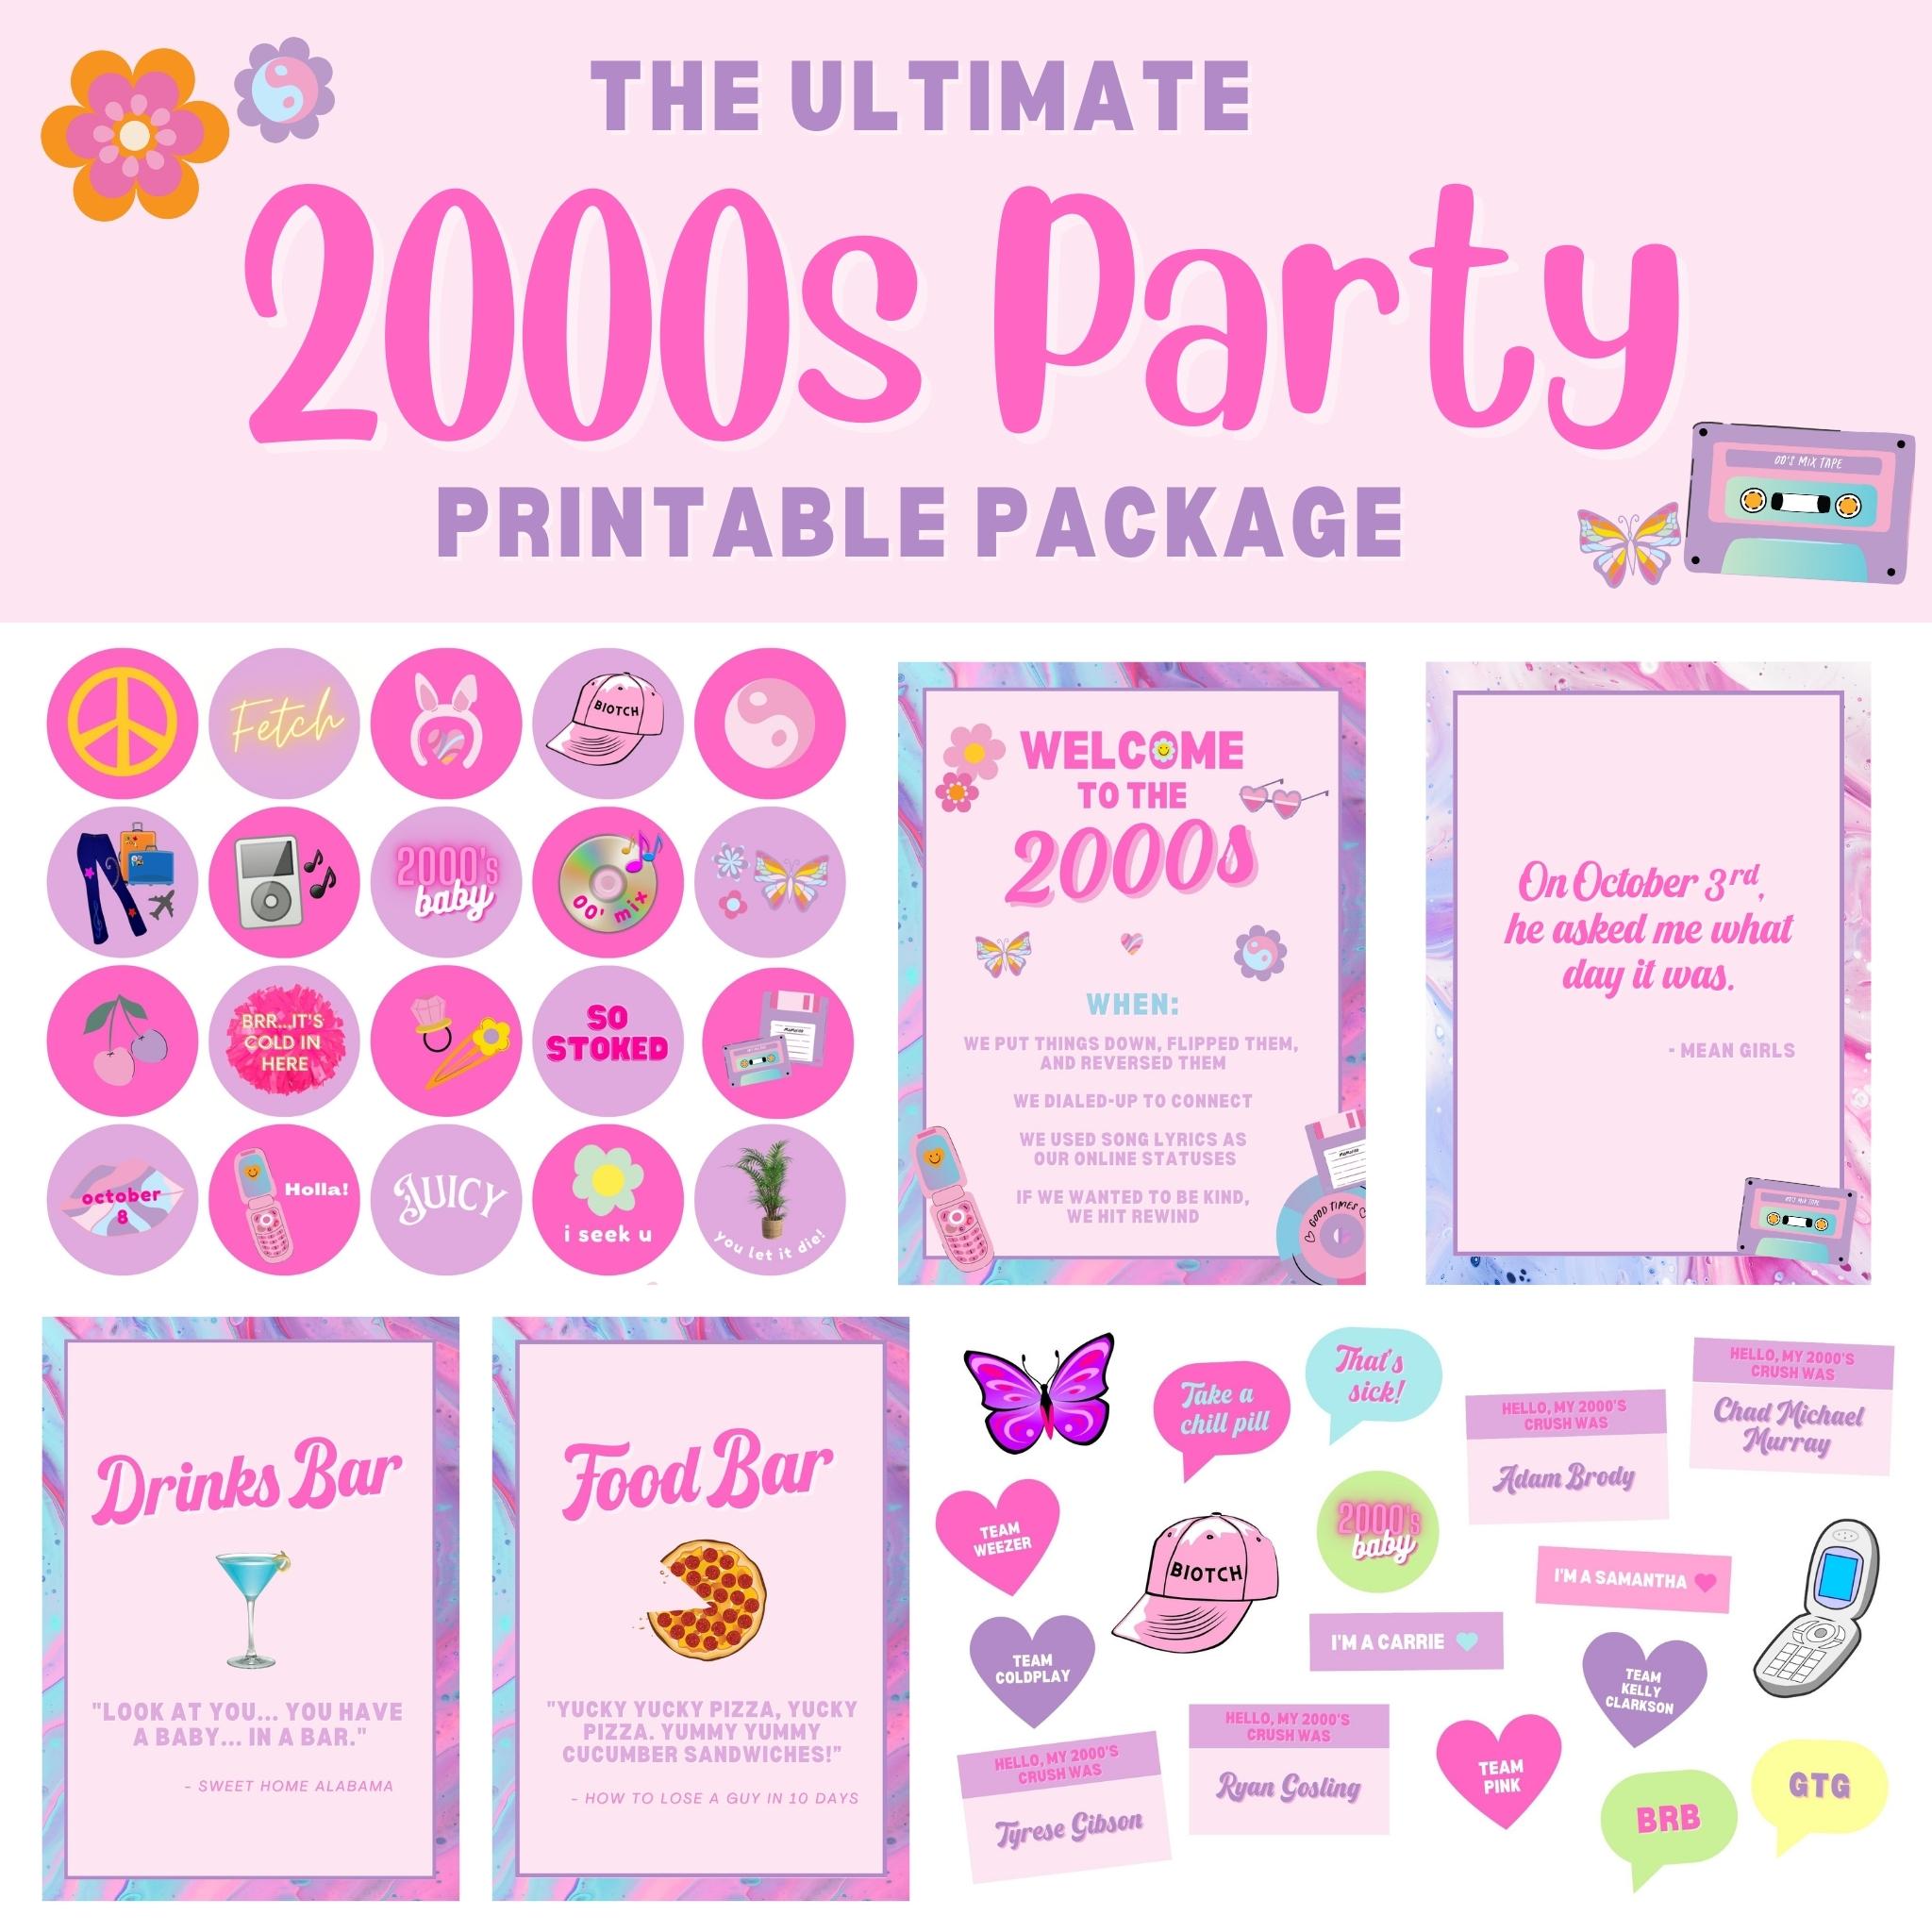 2000's Party Invitation | Y2K Aesthetic Birthday Party Digital Invite |  90s, early 2000's, 00s themed Retro | Printable, Instant Download